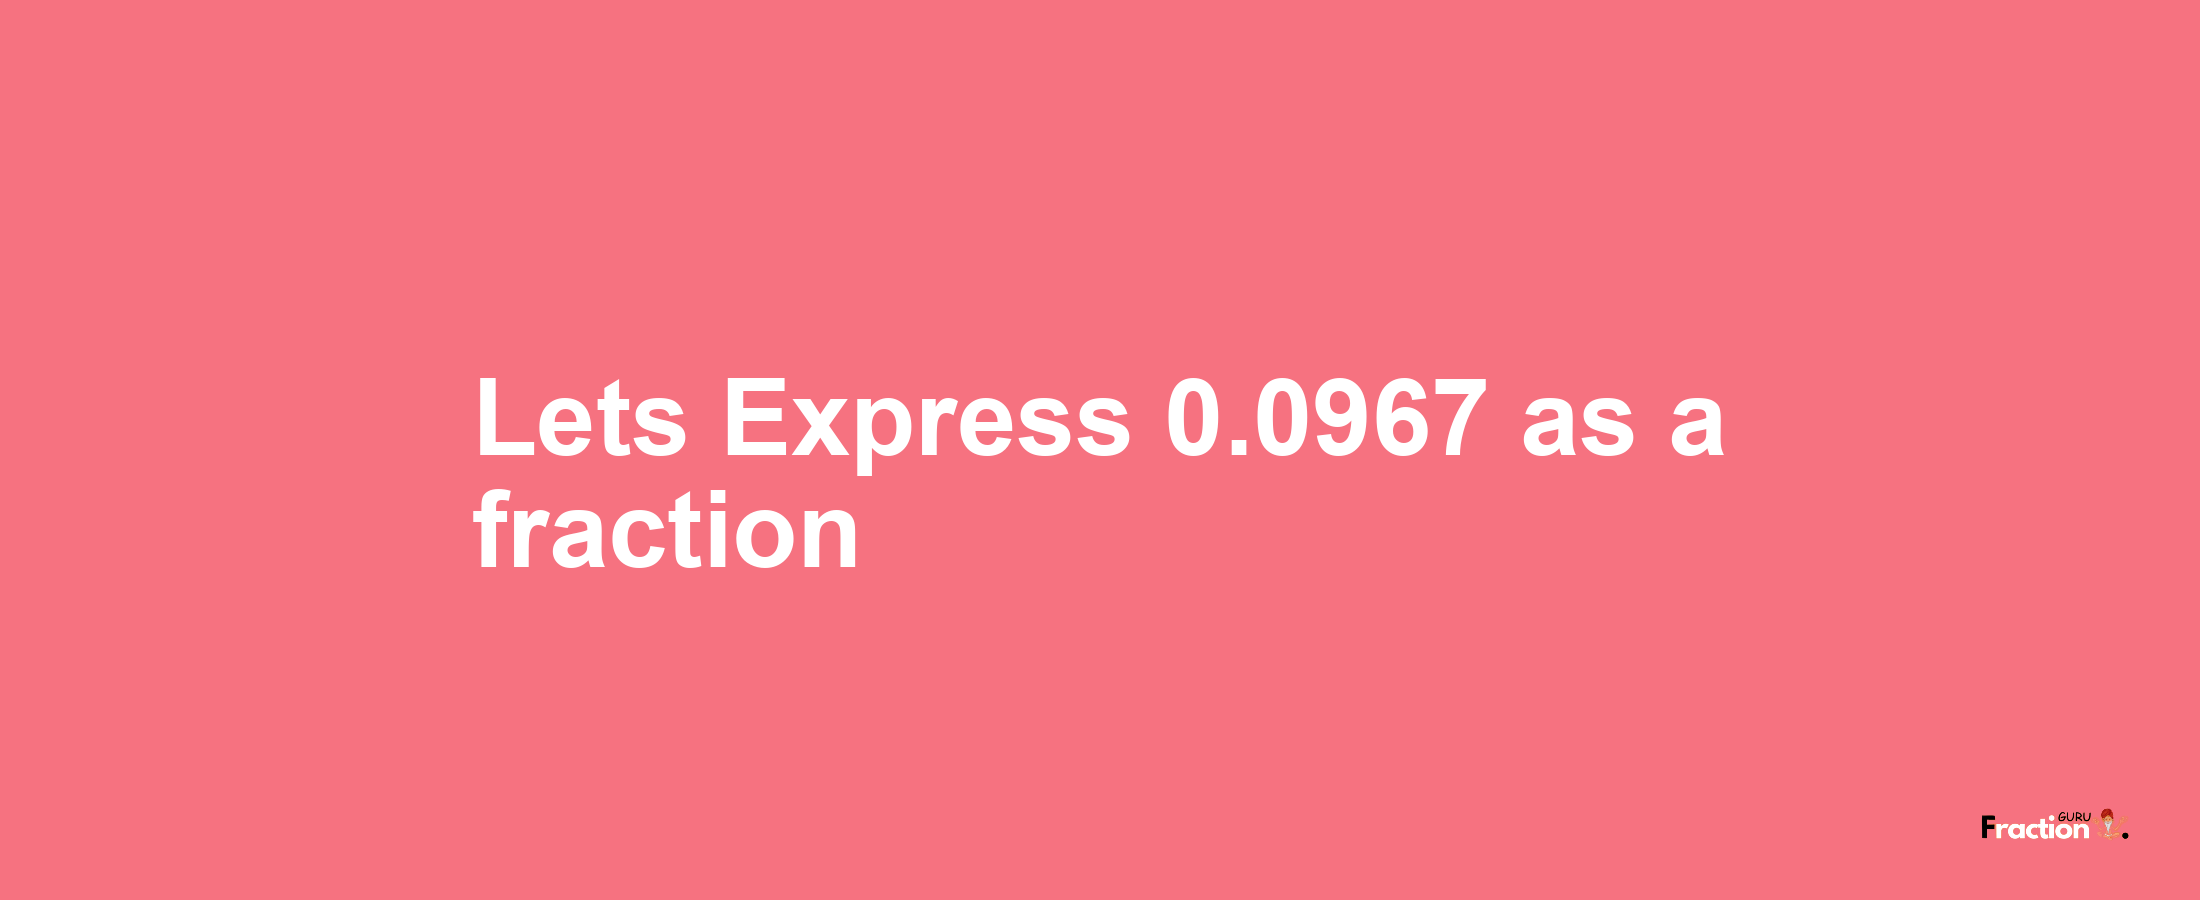 Lets Express 0.0967 as afraction